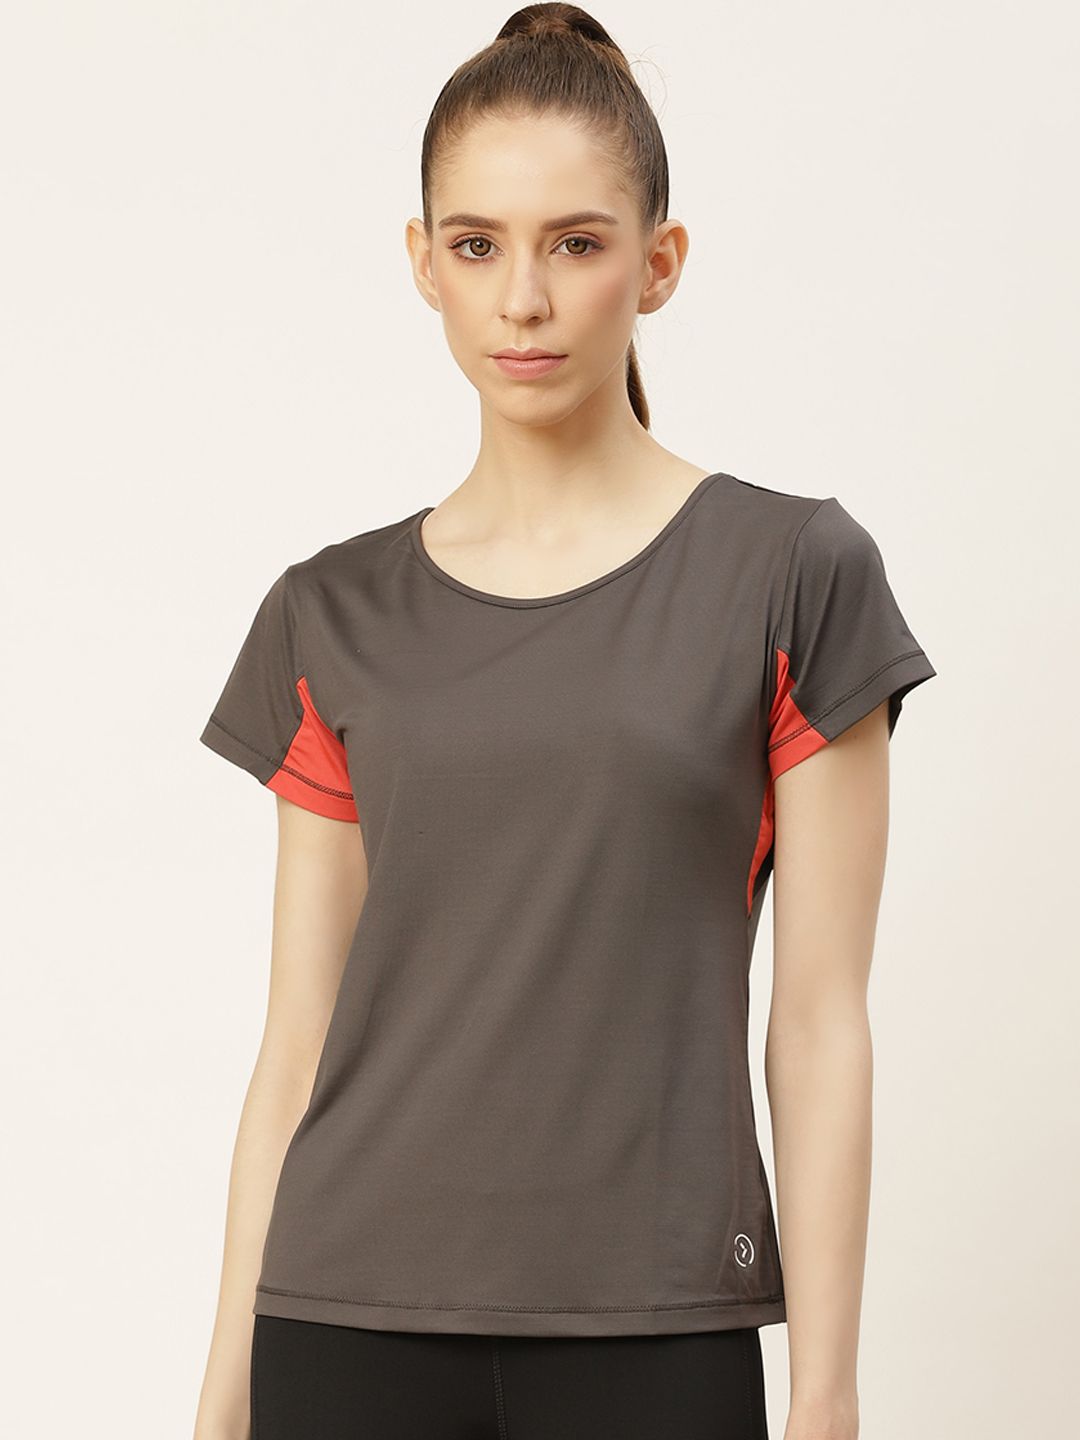 KICA Women Charcoal Grey Solid Rapid Dry T-shirt Price in India